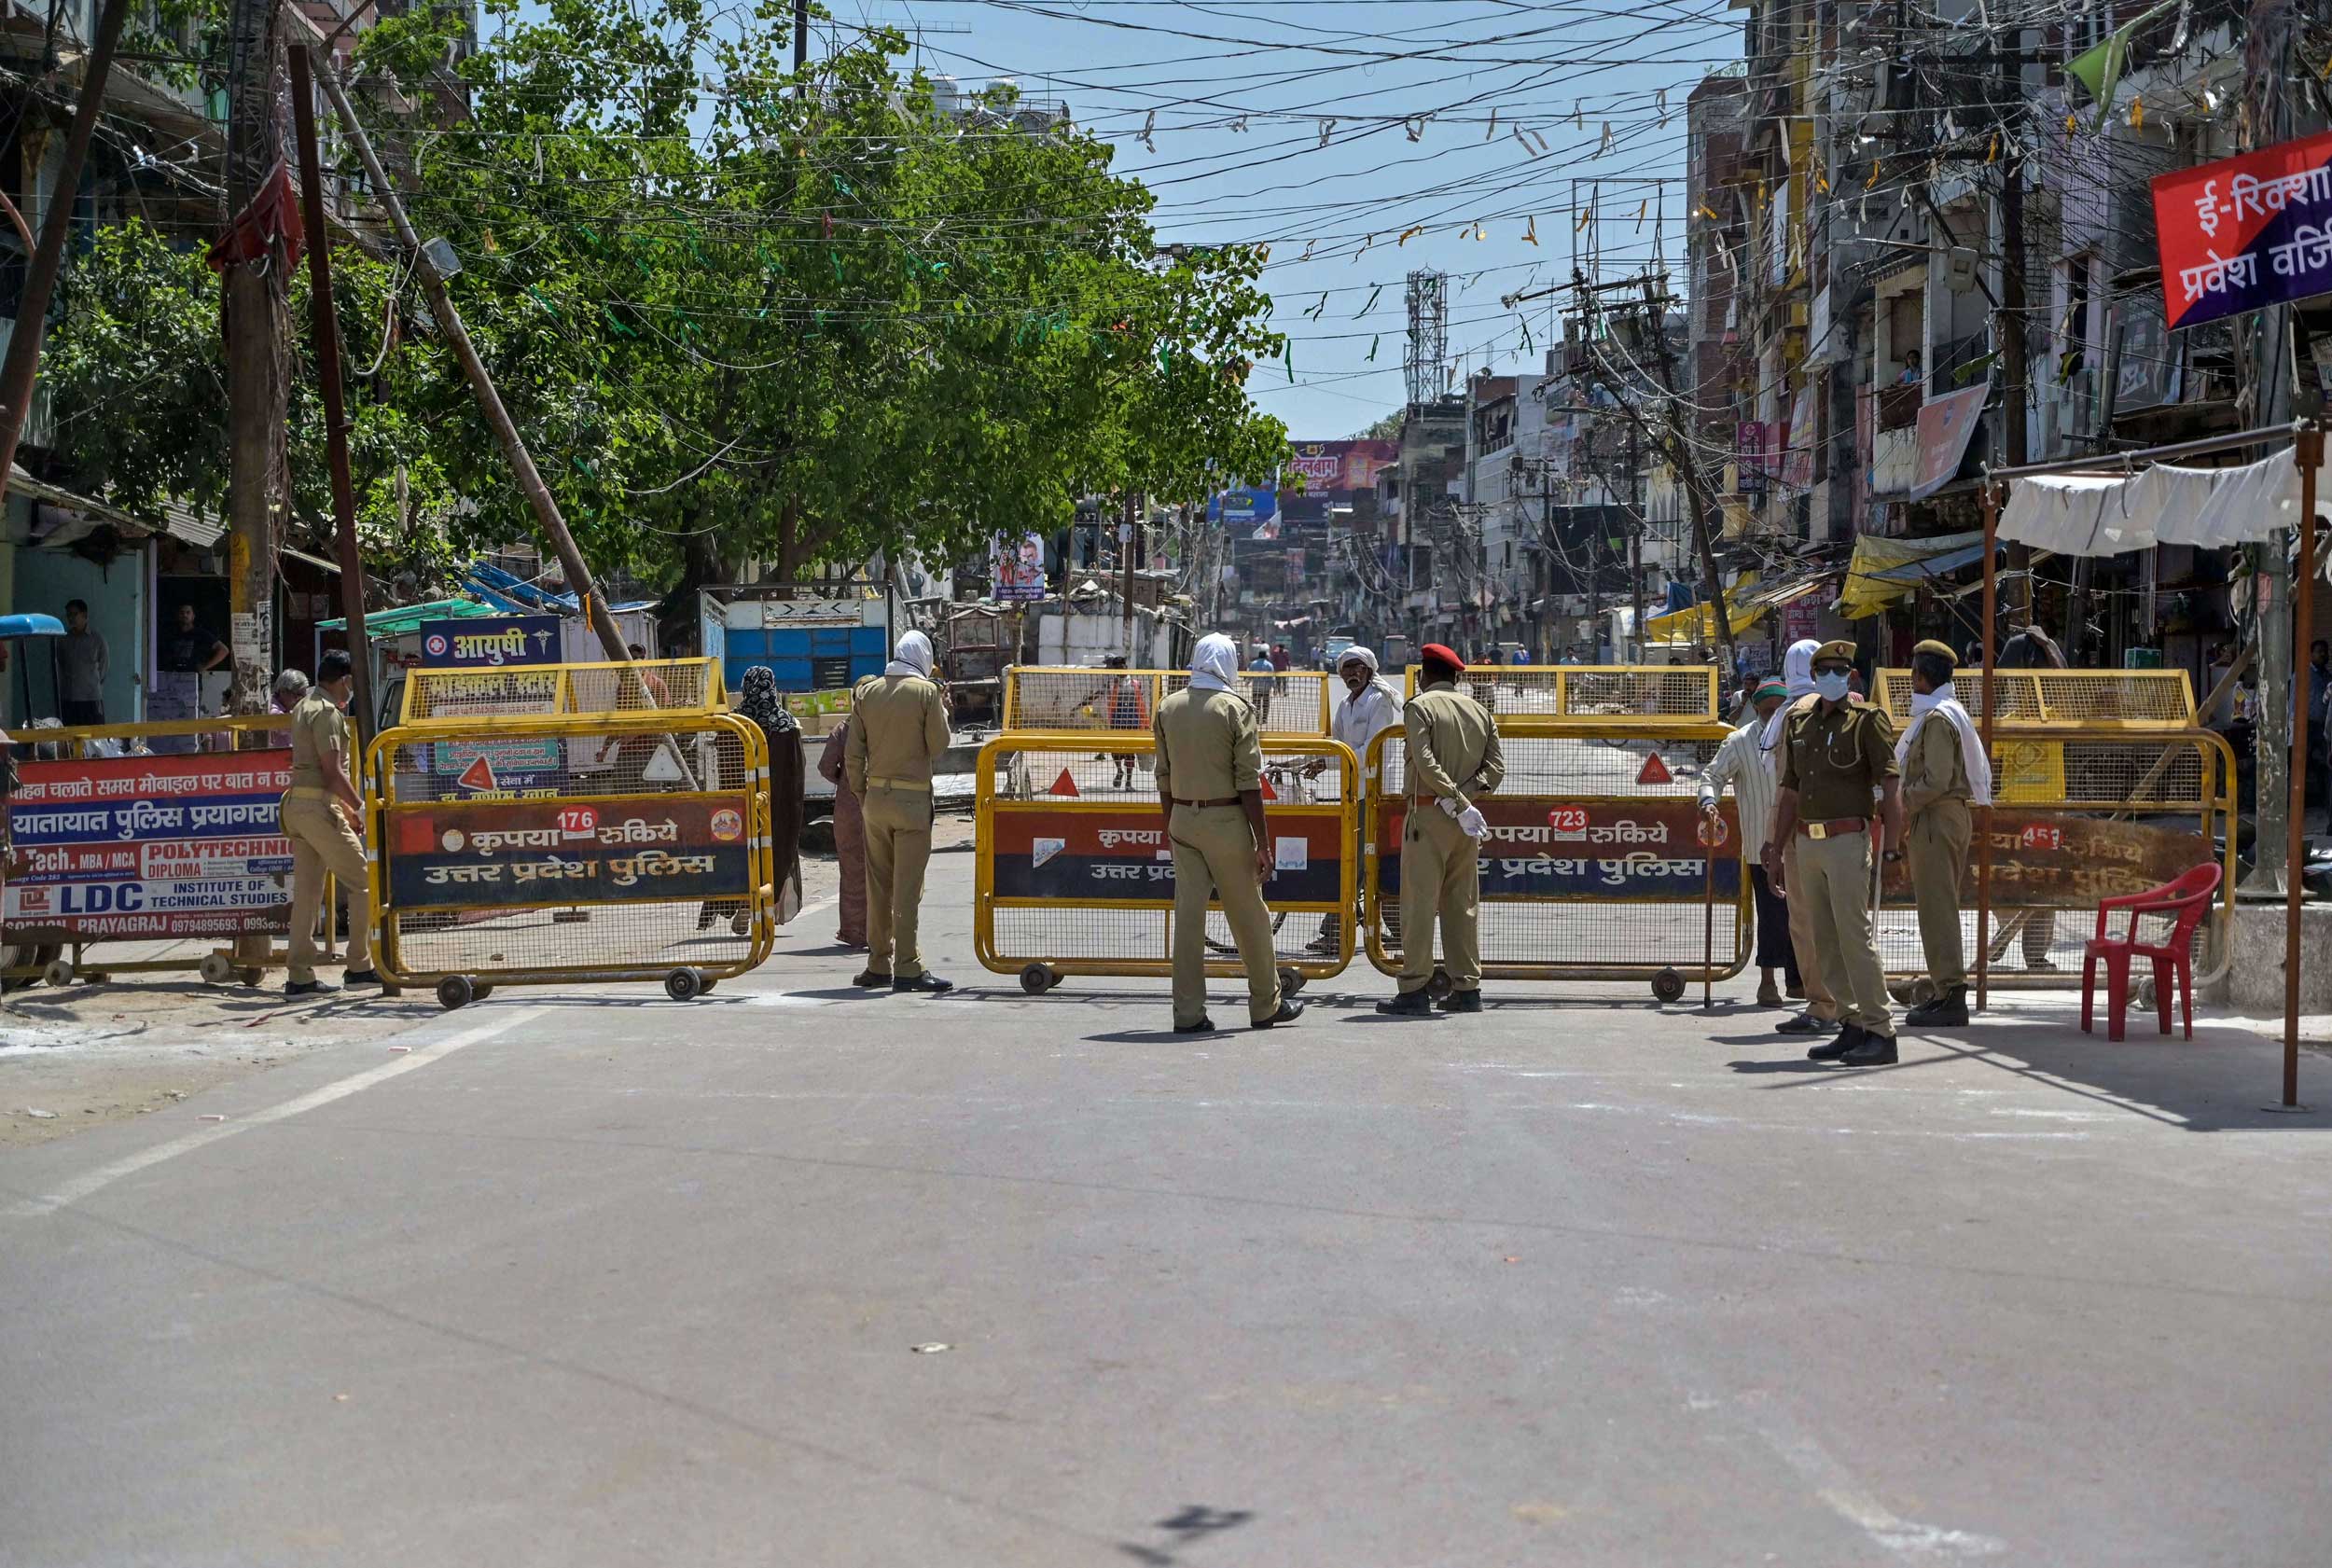 UP cops place barricades in old city after several Covid-19 cases were found in Allahabad on Monday.